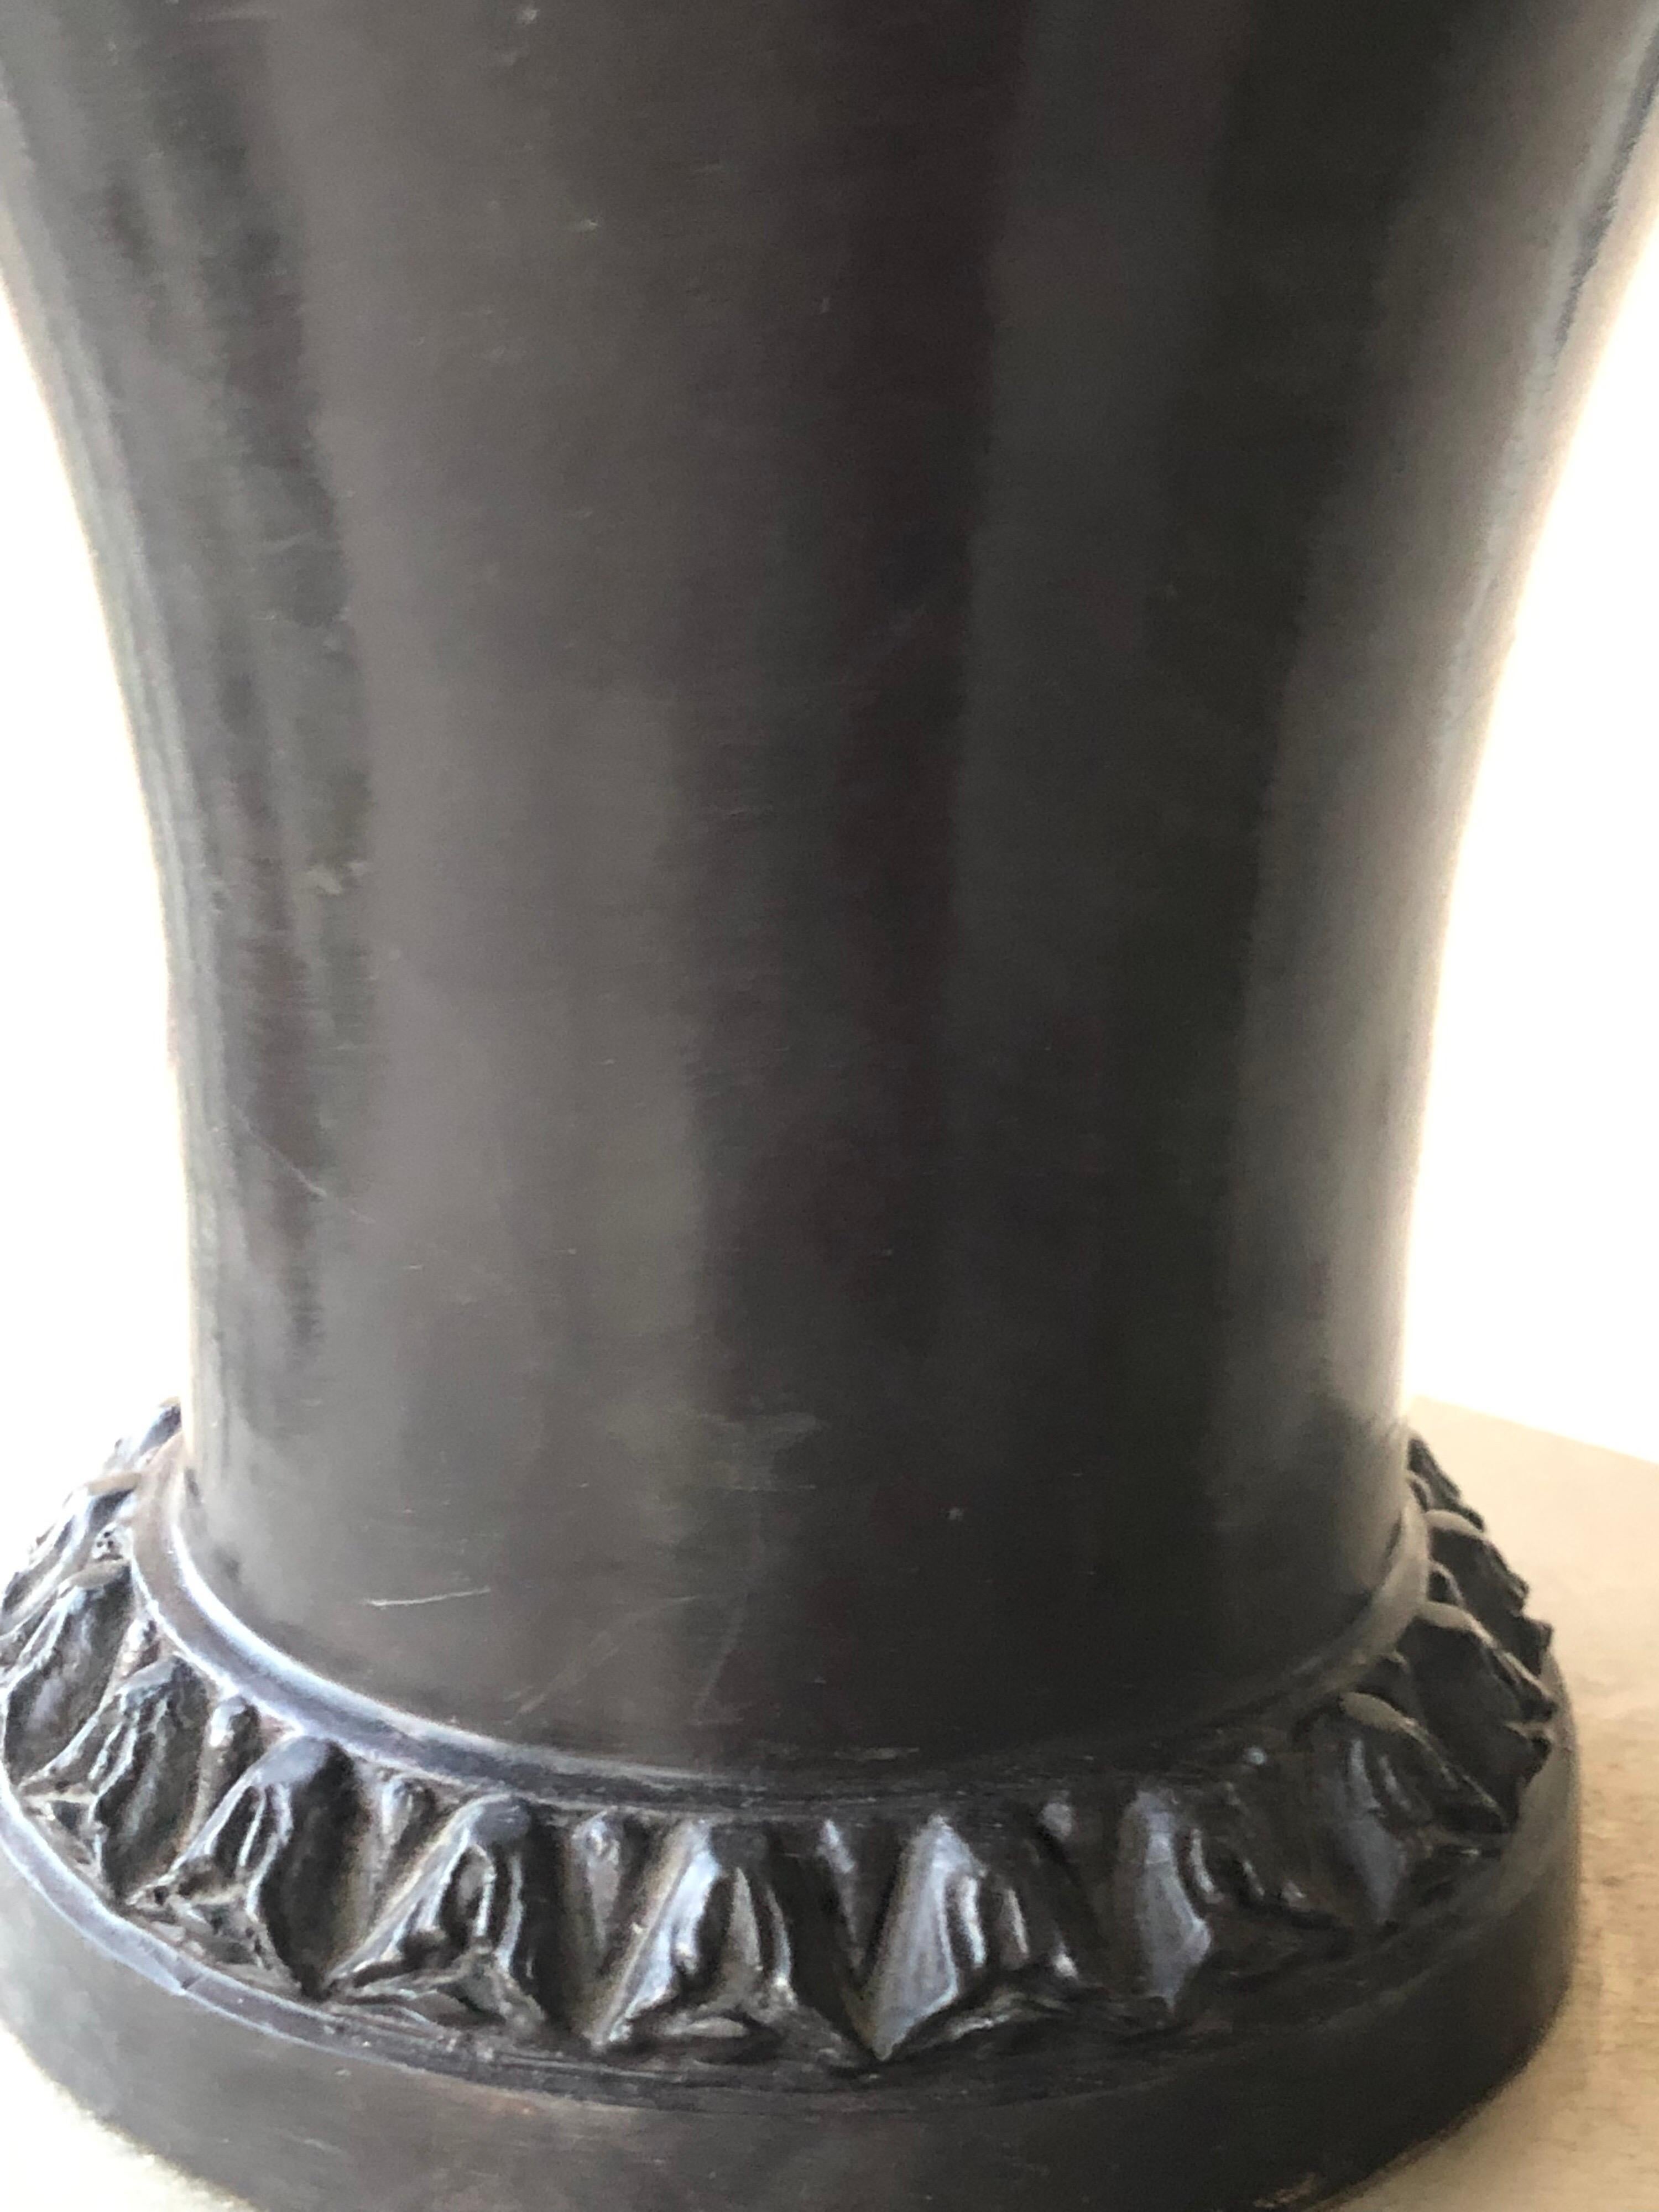 This lovely and very heavy urn was designed and made by Maitland Smith. Detail on the piece is amazing with beautiful handles with the face of a woman and intricate bronze top. From a very chic Palm Springs estate.